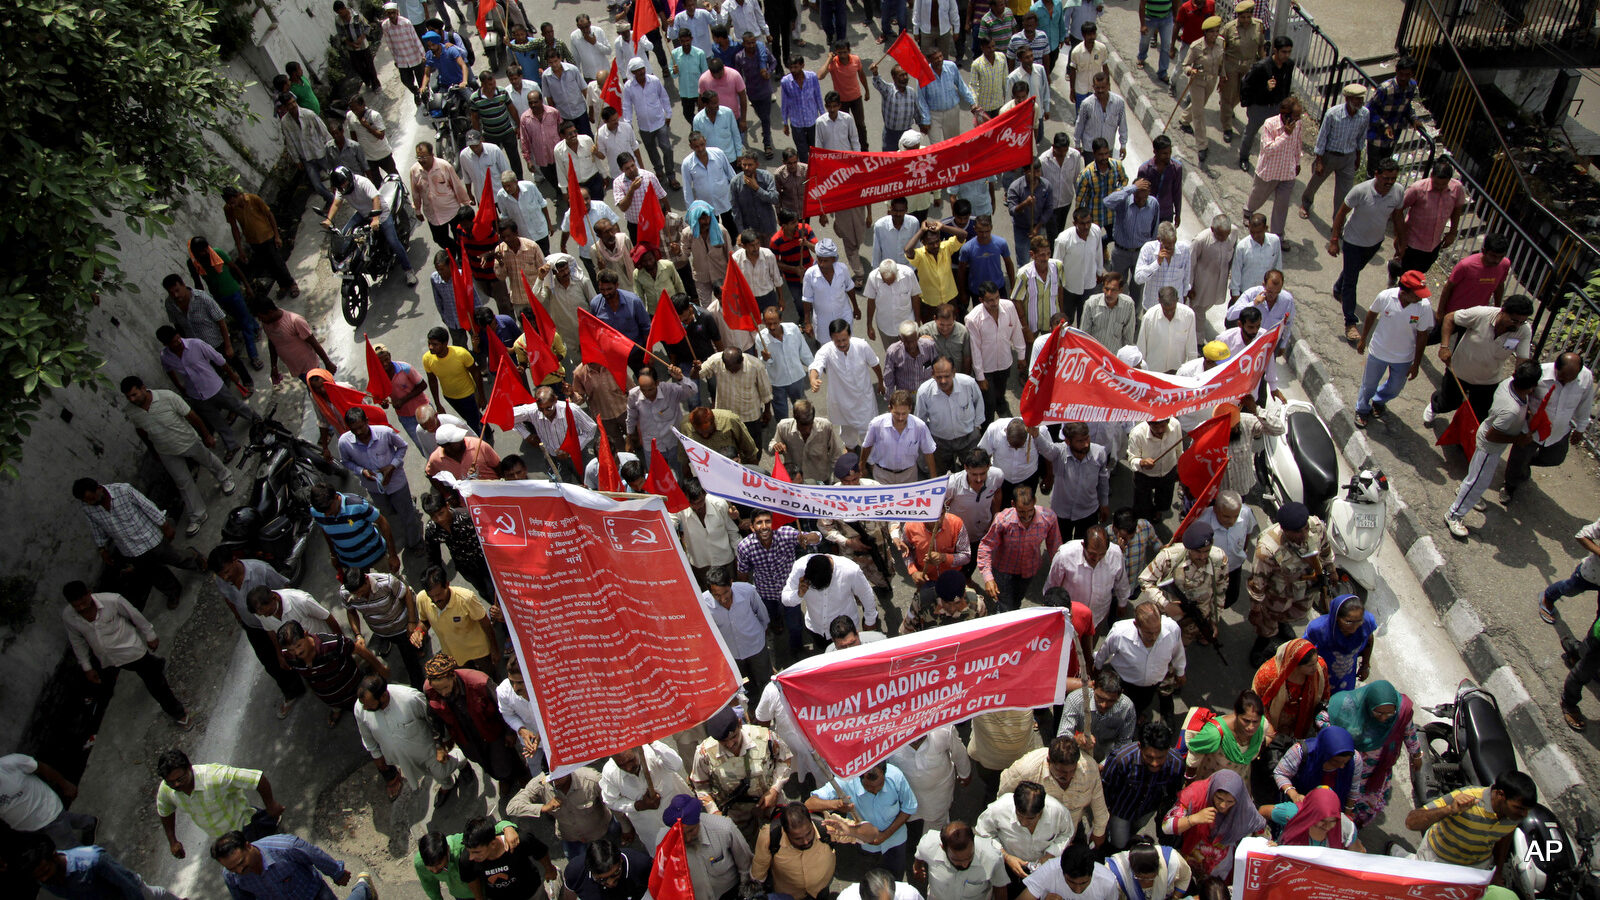 Indian workers participate in a rally during a nationwide strike called by trade unions, in Jammu, India, Sept. 2, 2016.The strike has been called against the government's alleged anti labor policies. Activists also demanded higher minimum wages and provision of social security for workers from unorganized sectors.